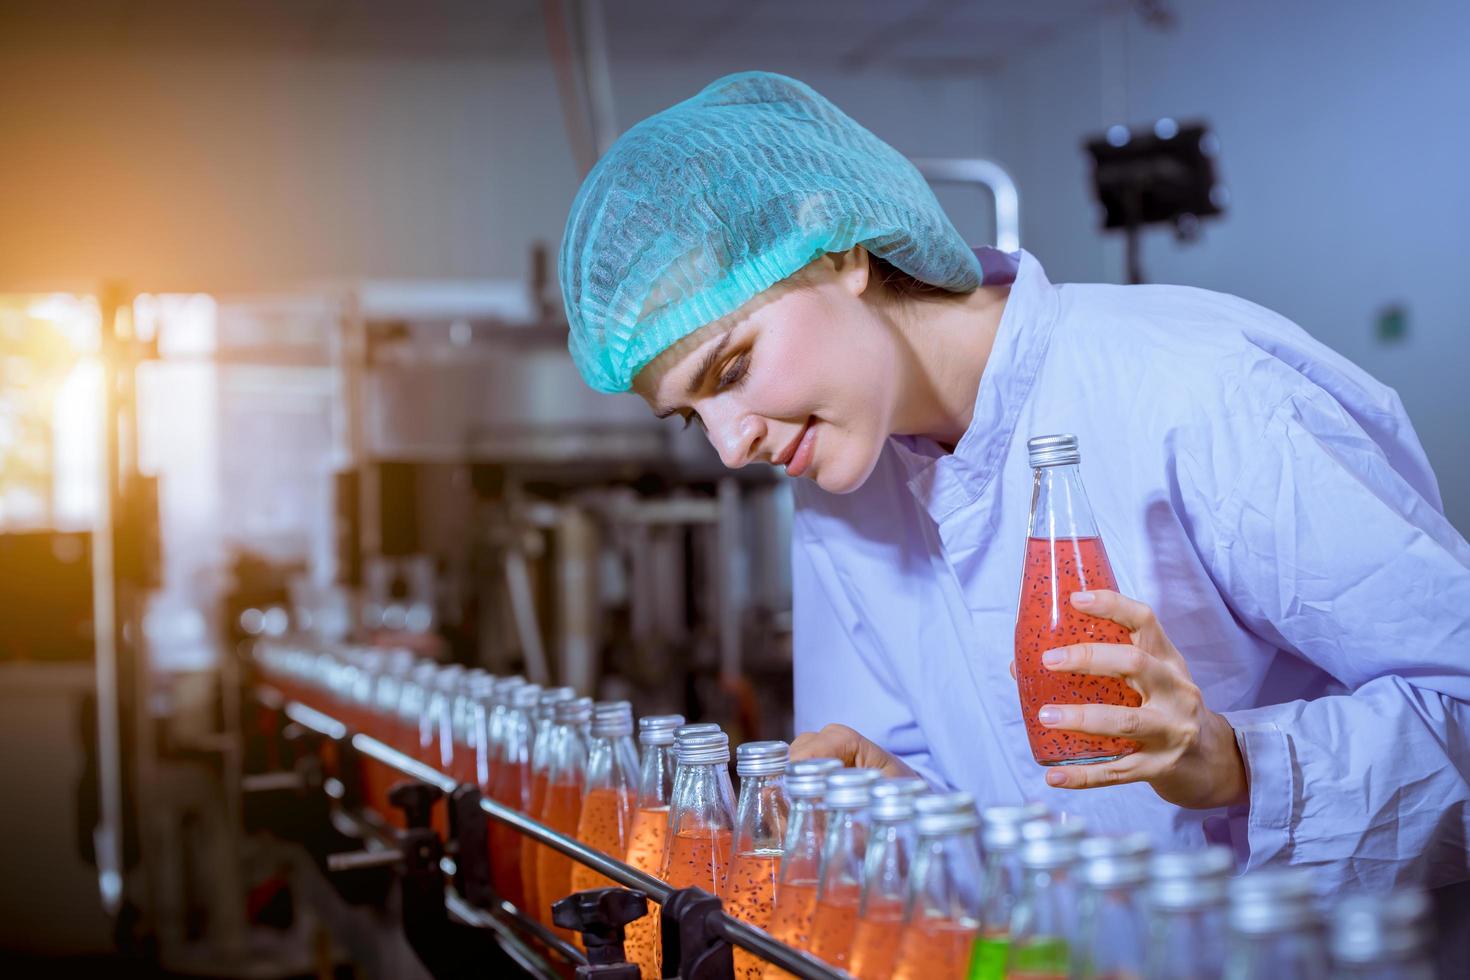 Worker of science in bottle beverage factory wearing safety hat posing show work to check quality of Basil seed produce on conveyer belt before distribution to market business. photo